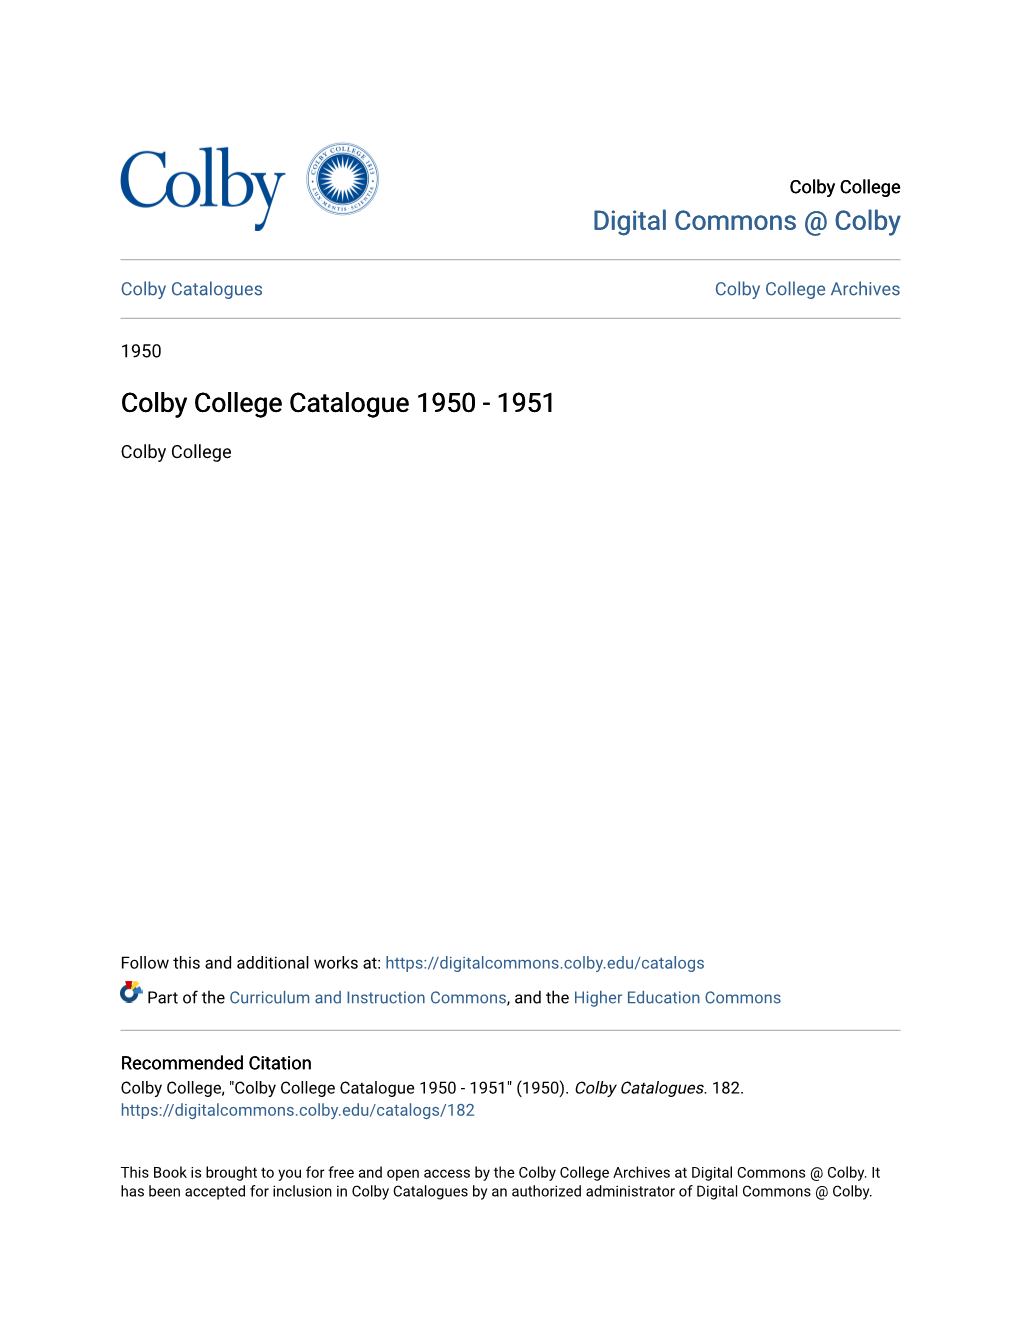 Colby College Catalogue 1950 - 1951